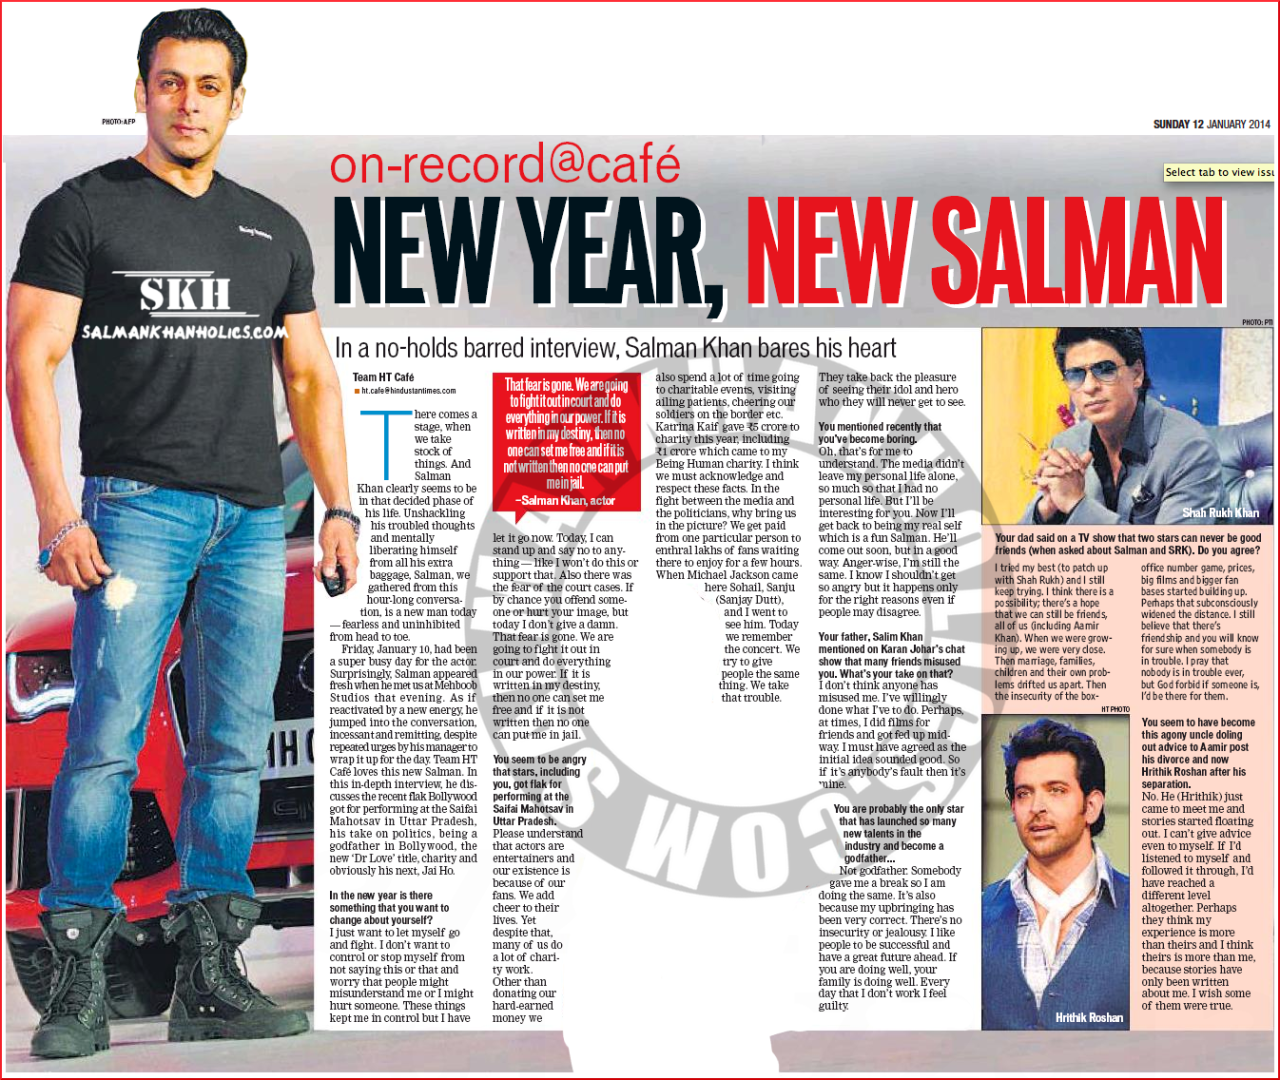 salman - ★ (Interview) New Year, New Salman! In a no-holds barred interview, Salman Khan bares his heart… Tumblr_mz9mqqDXm31qctnzso1_1280